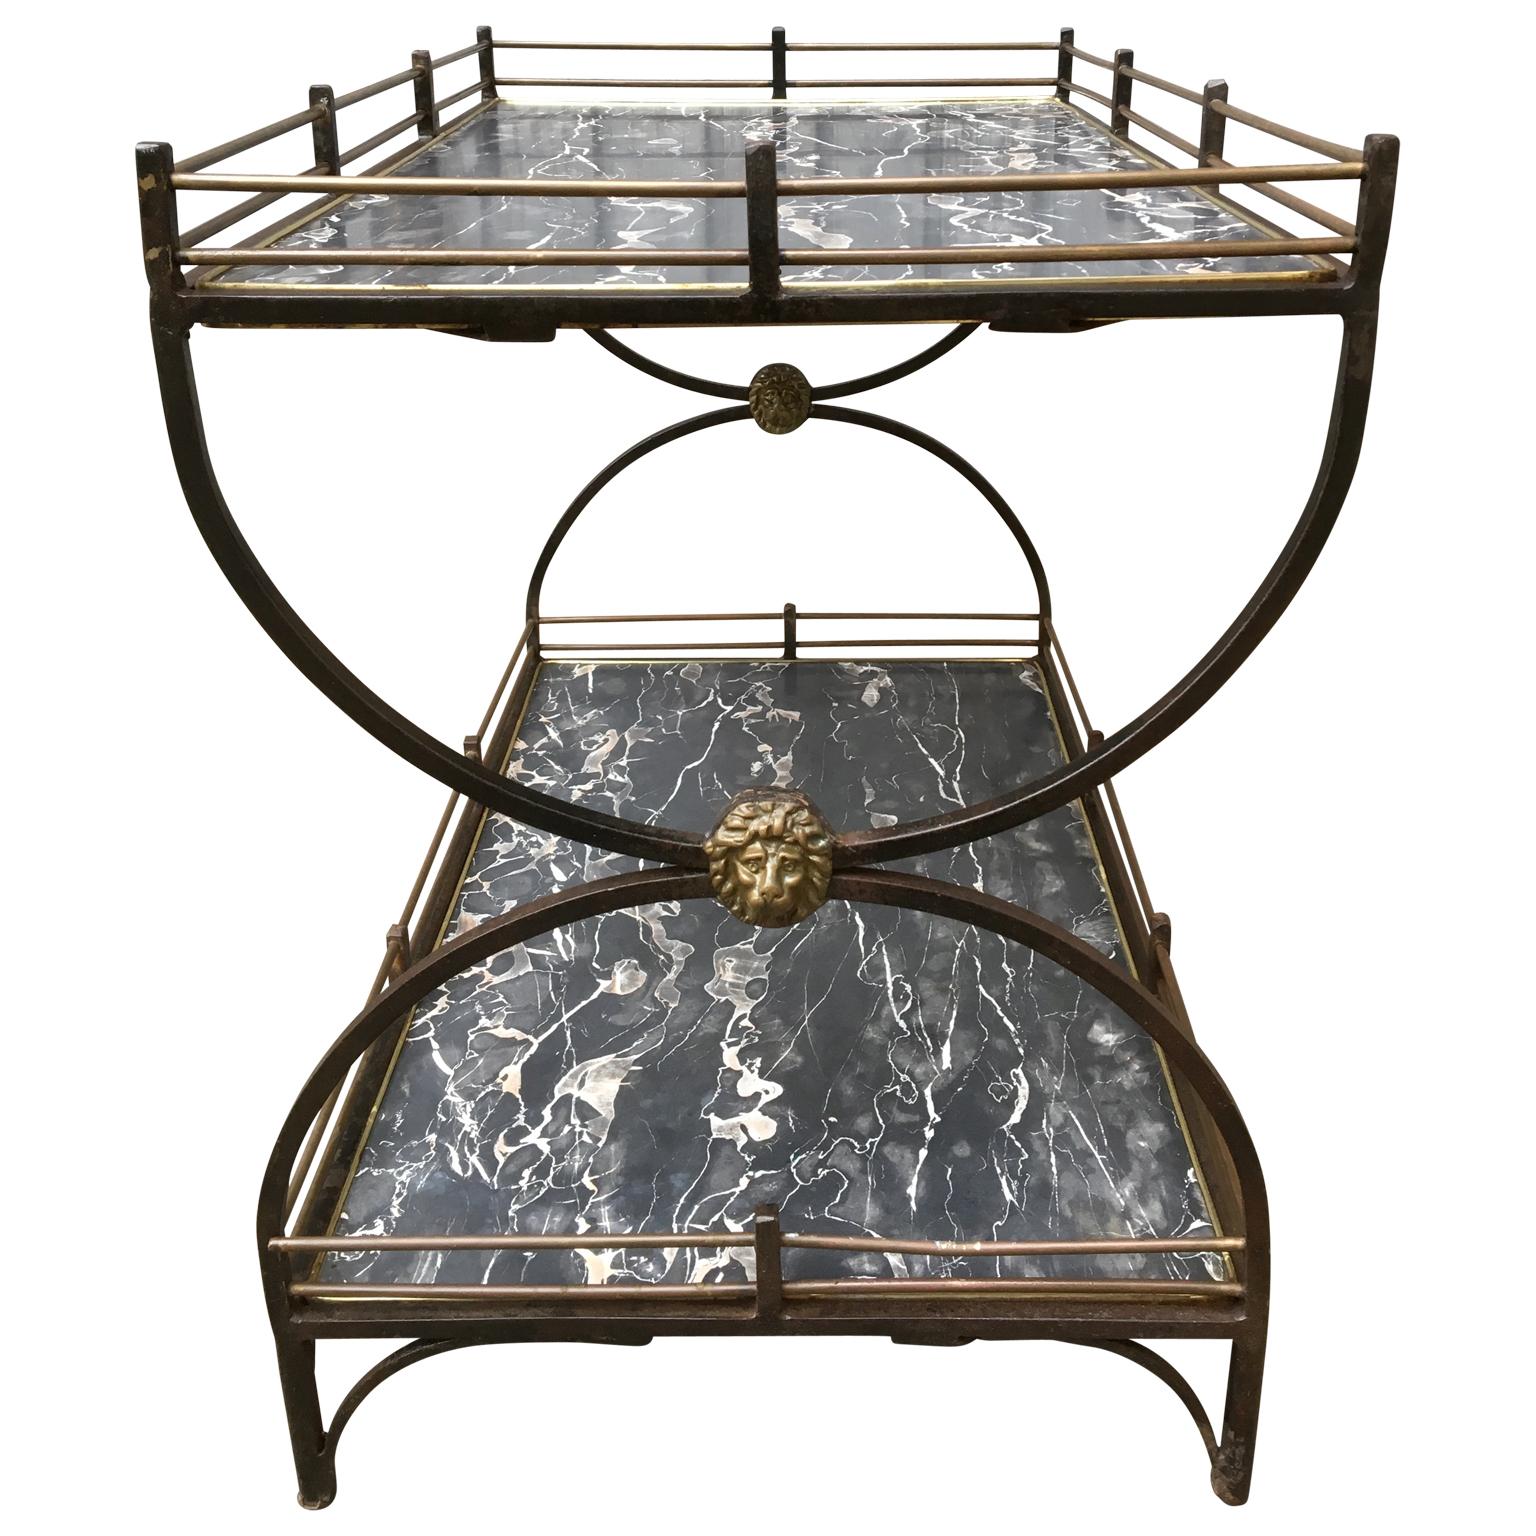 English two-tier Mid-Century Modern brass and iron bar cart with lion heads

The wooden shelves have a faux black marble linoleum sheet covers. 

         